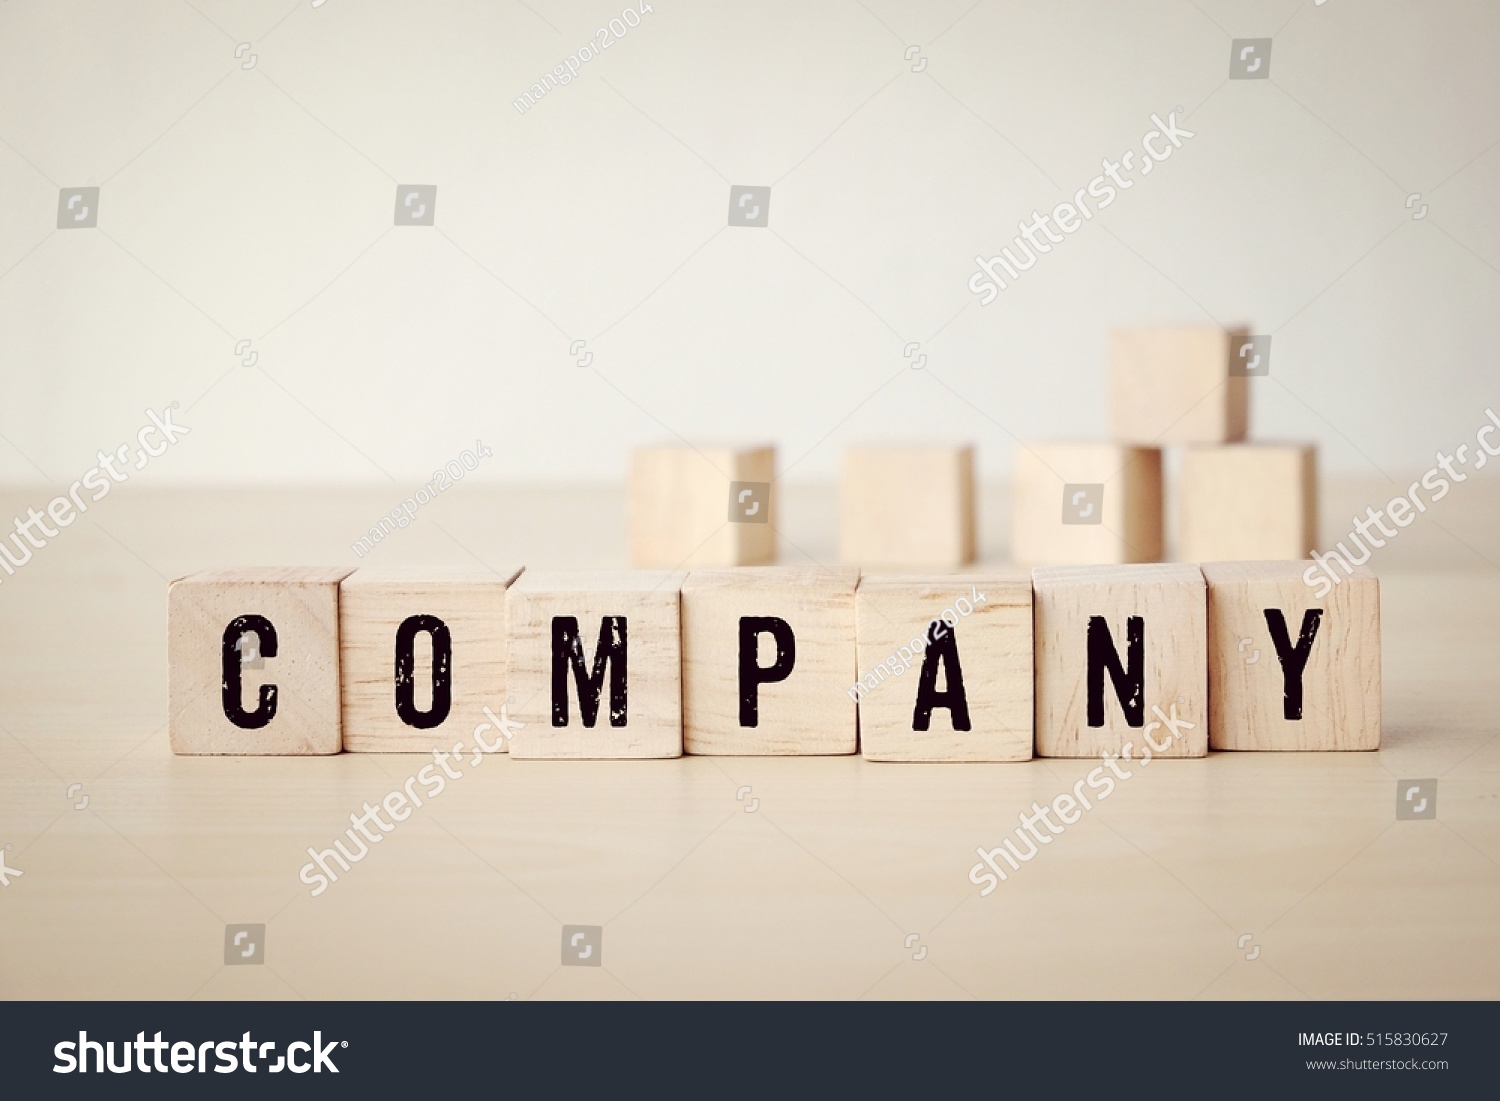 Company word on wooden cubes background, business concept #515830627